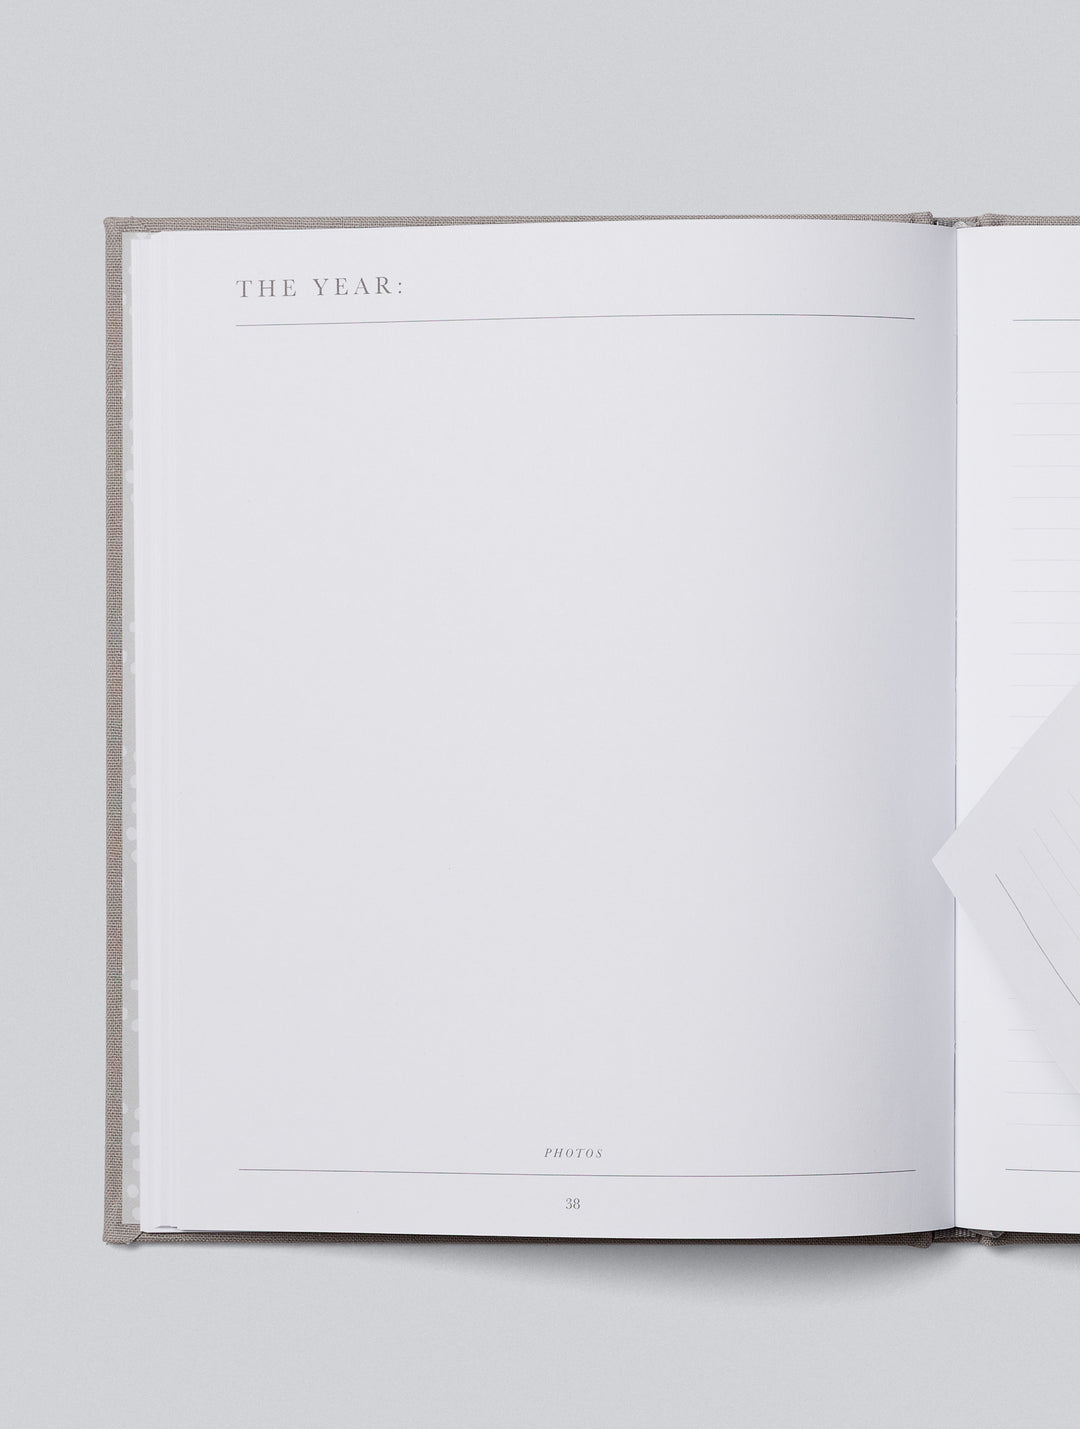 Write To Me - 21 Years of You Journal - Light Grey